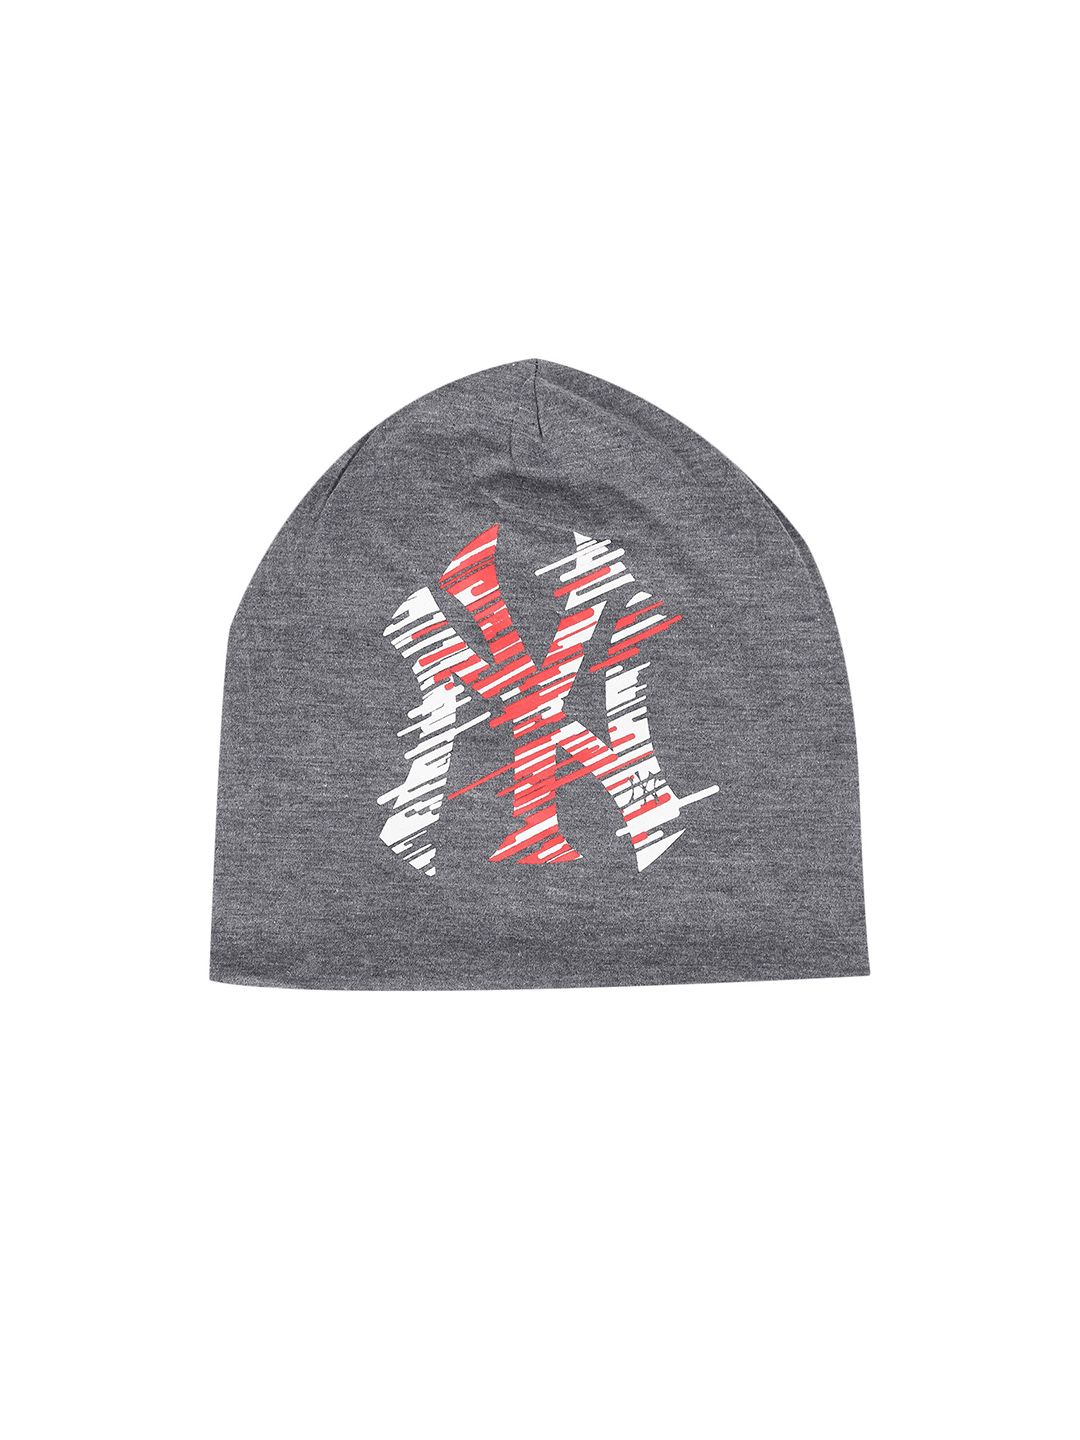 iSWEVEN Unisex Grey & White New York Yankees Printed Beanie Price in India